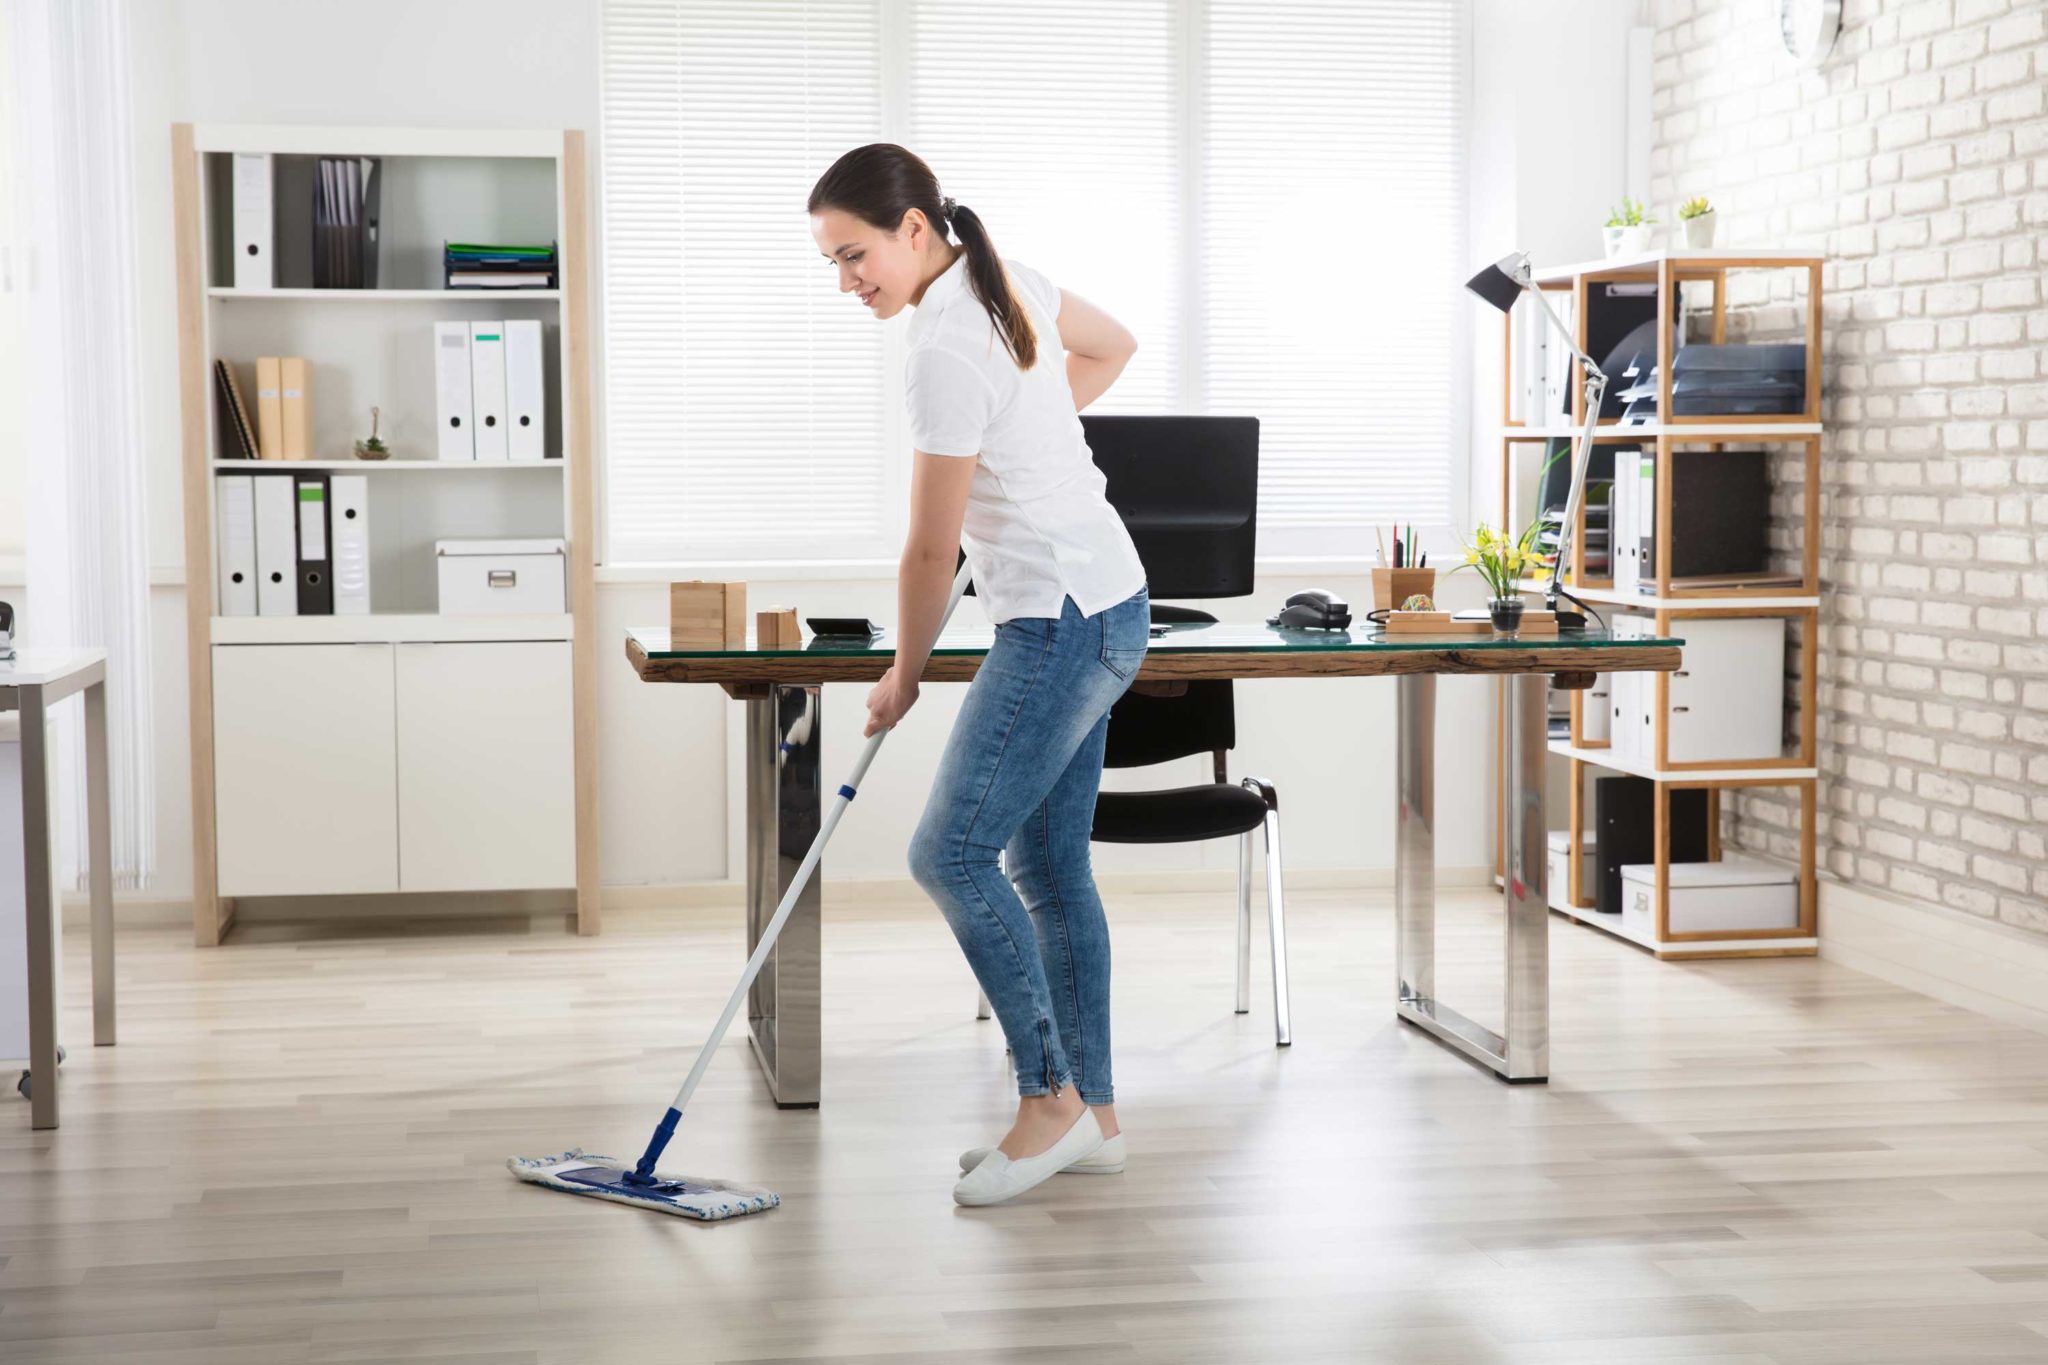 Housekeeping/ Cleaning Services – Family Home Stays